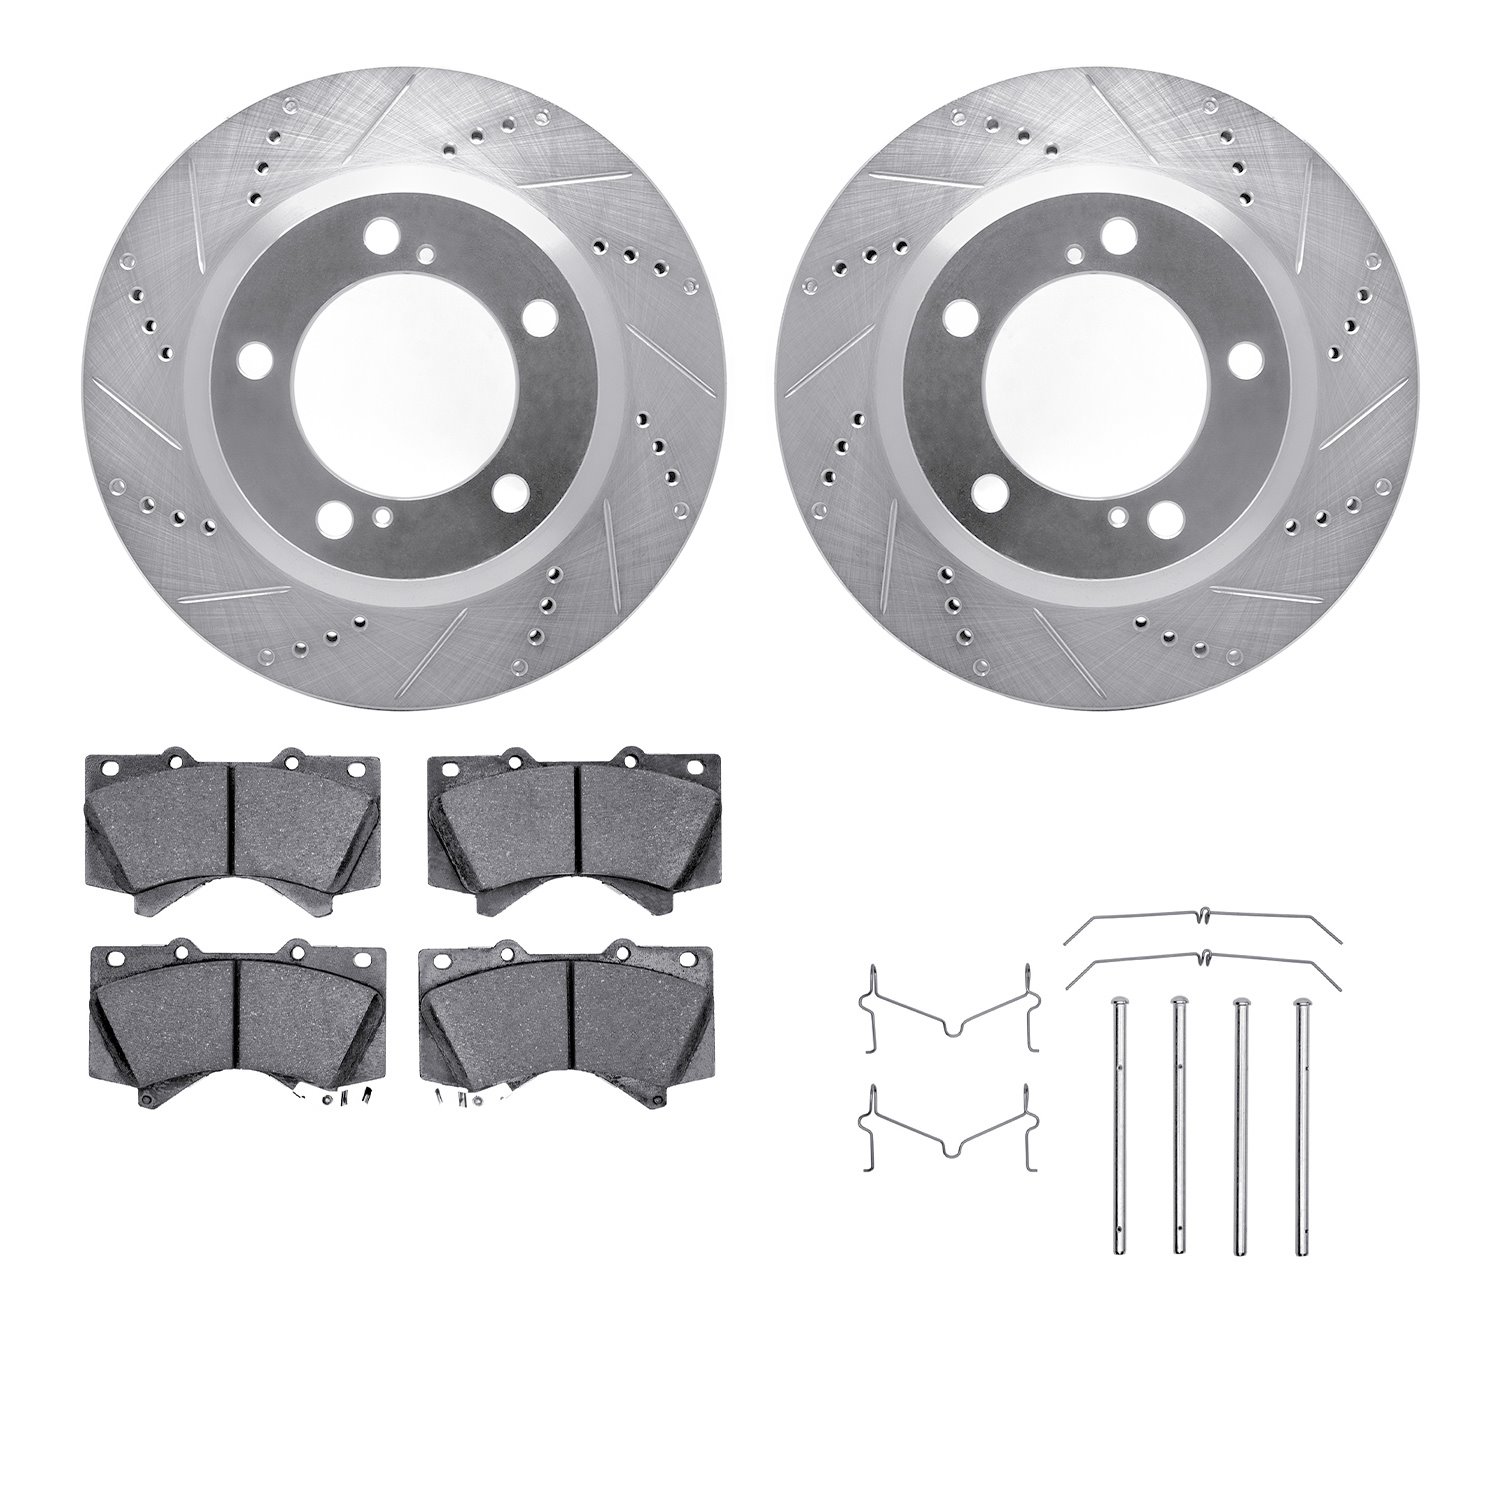 7412-76021 Drilled/Slotted Brake Rotors with Ultimate-Duty Brake Pads Kit & Hardware [Silver], 2008-2021 Lexus/Toyota/Scion, Pos